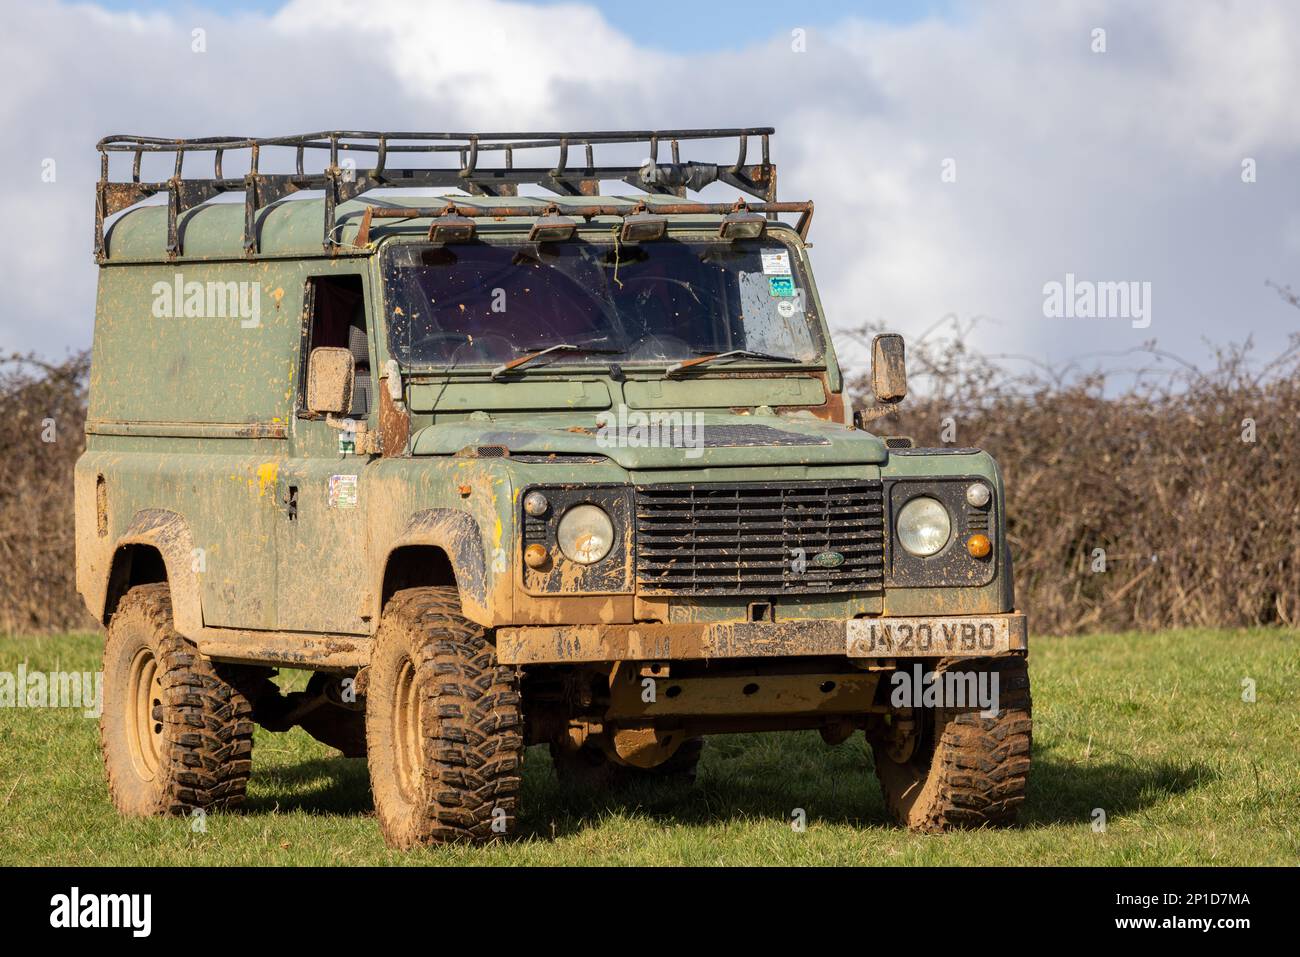 February 2023 - Ex military Land Rover Defender 110 taking part in an ADWC off road trial at Chewton Mendip in Somerset, UK. Stock Photo